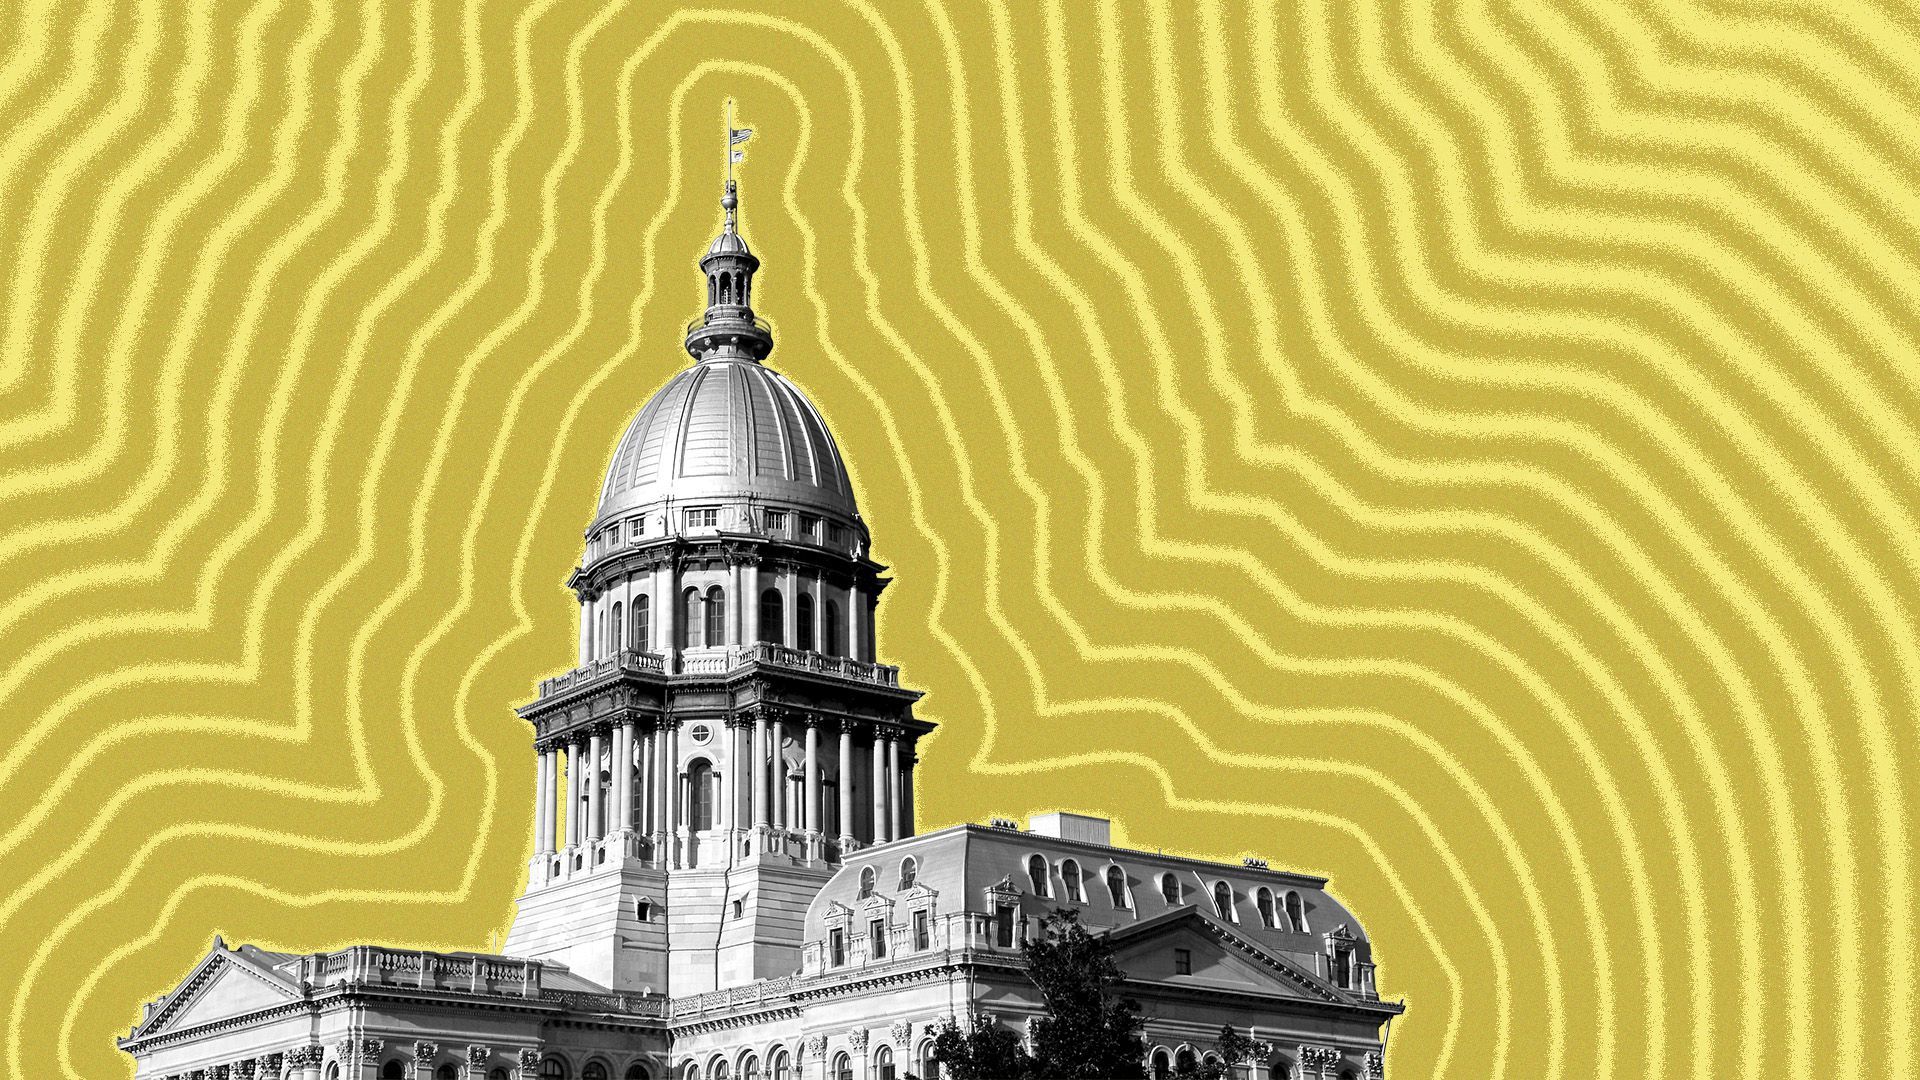 Illustration of the Illinois State Capitol building with lines radiating from it.